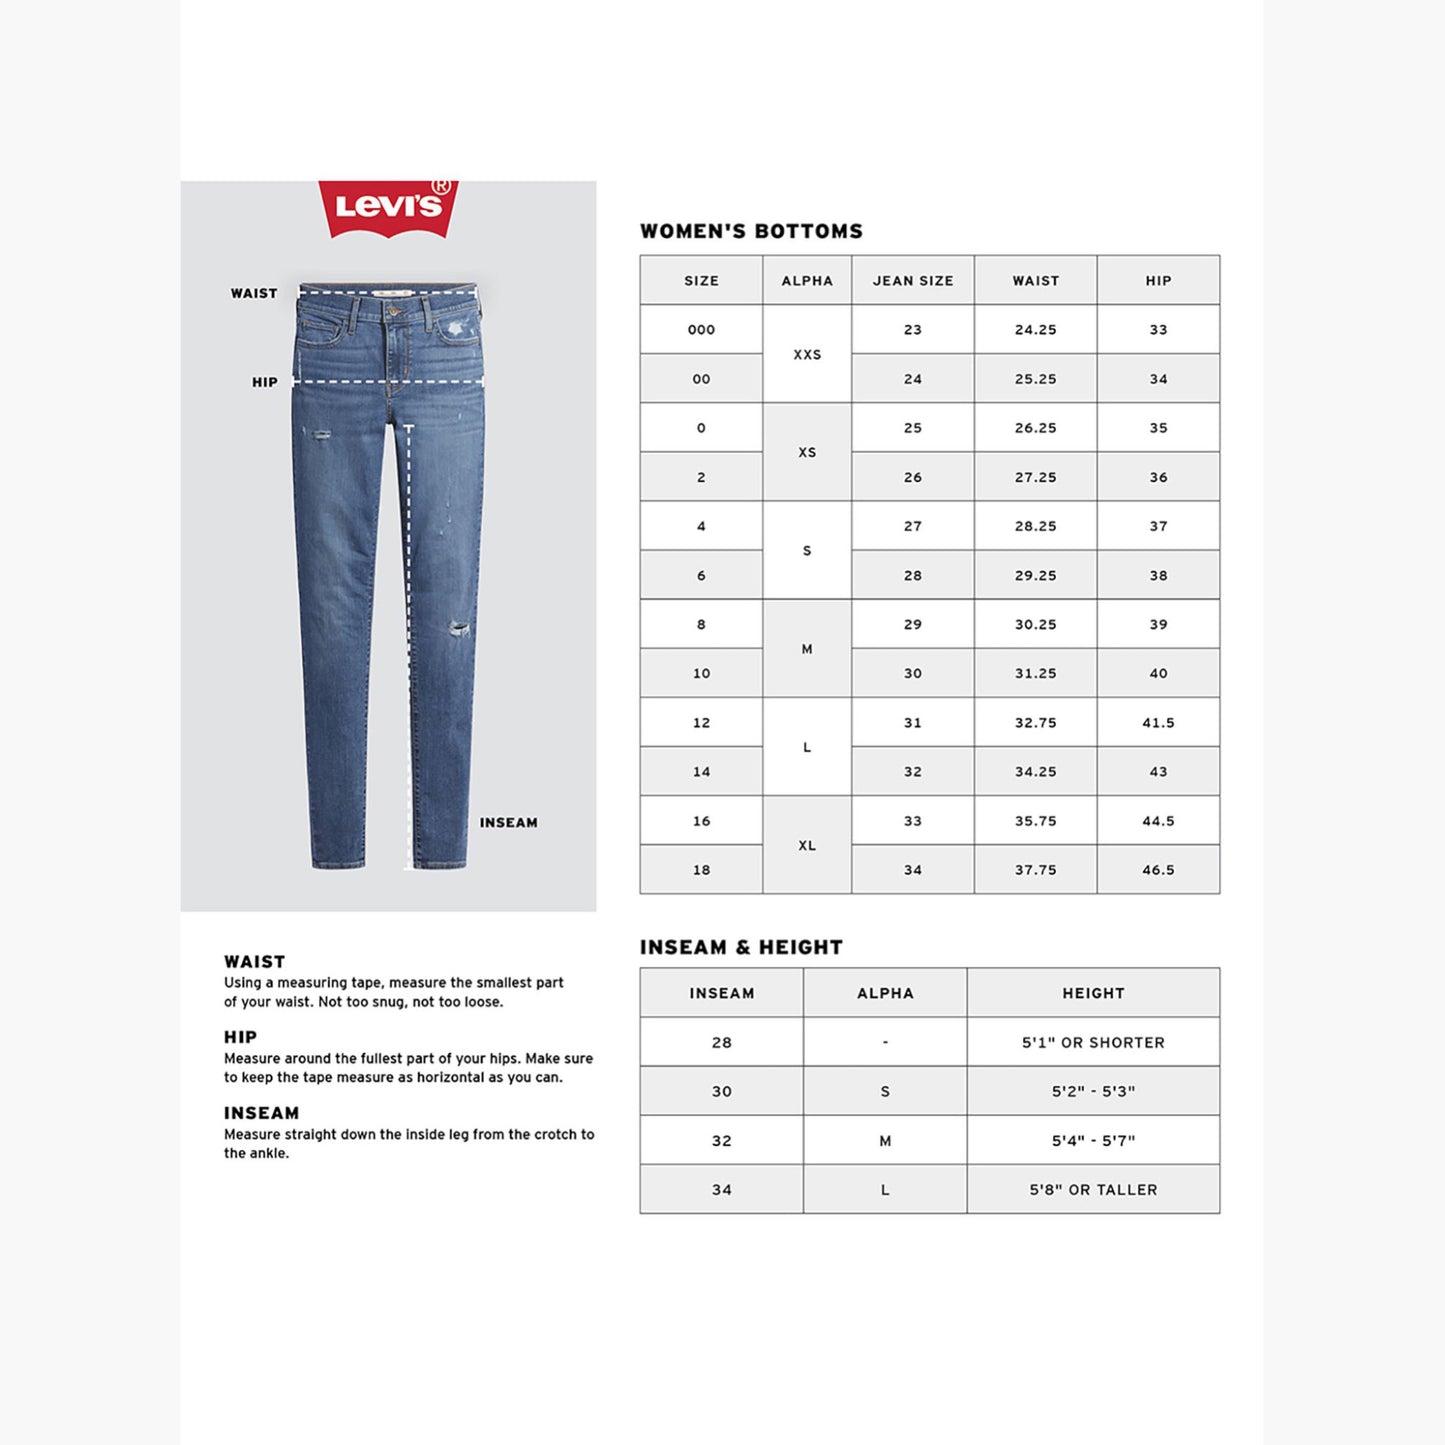 Levi's 721 High Rise Skinny Women's Jeans - Straight Through